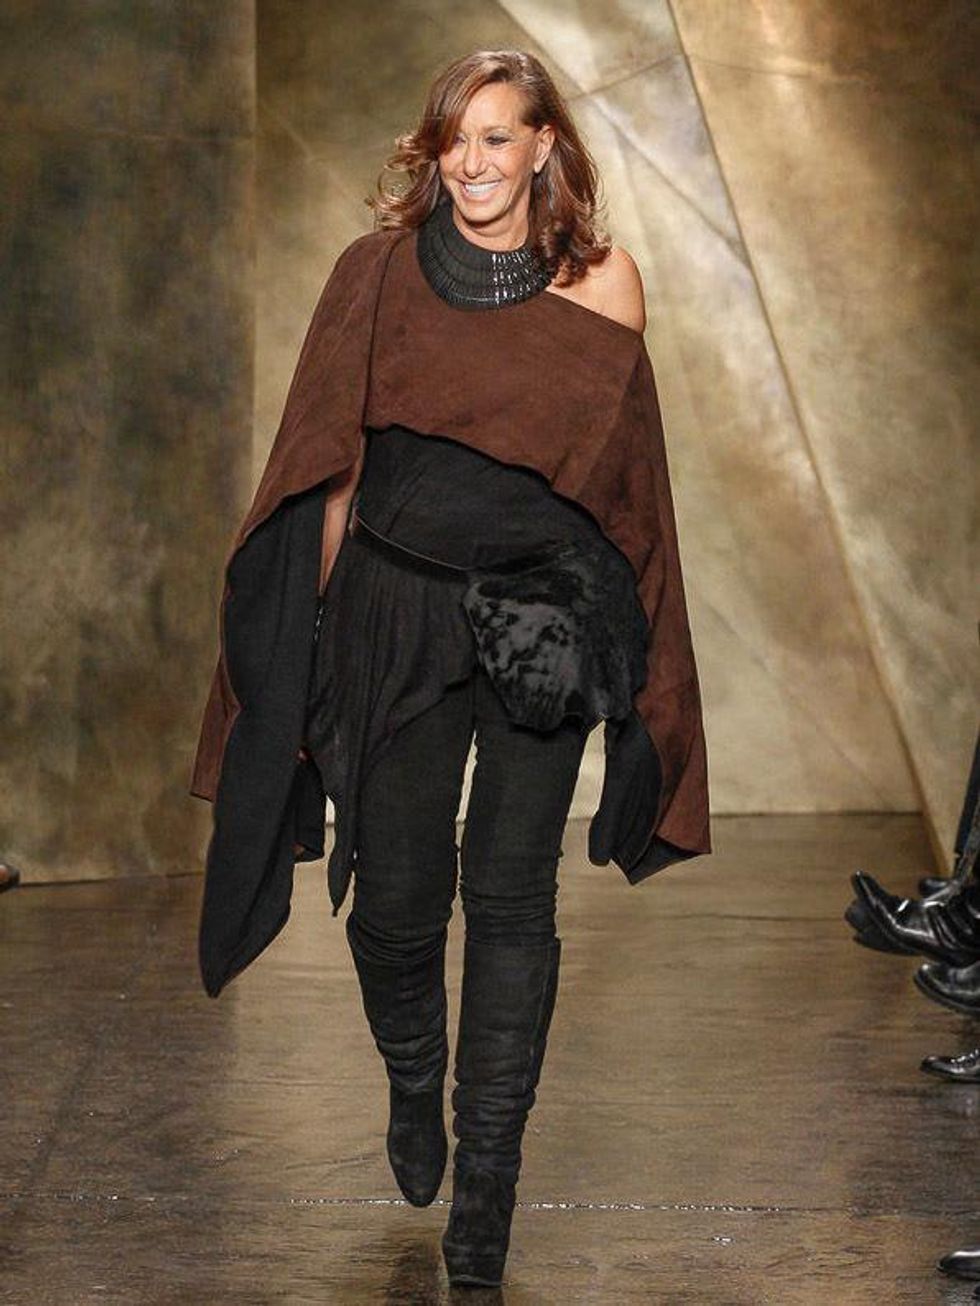 Cape 'n drape: Donna Karan shows her savage, sensual side in collection  that returns to her roots - CultureMap Houston